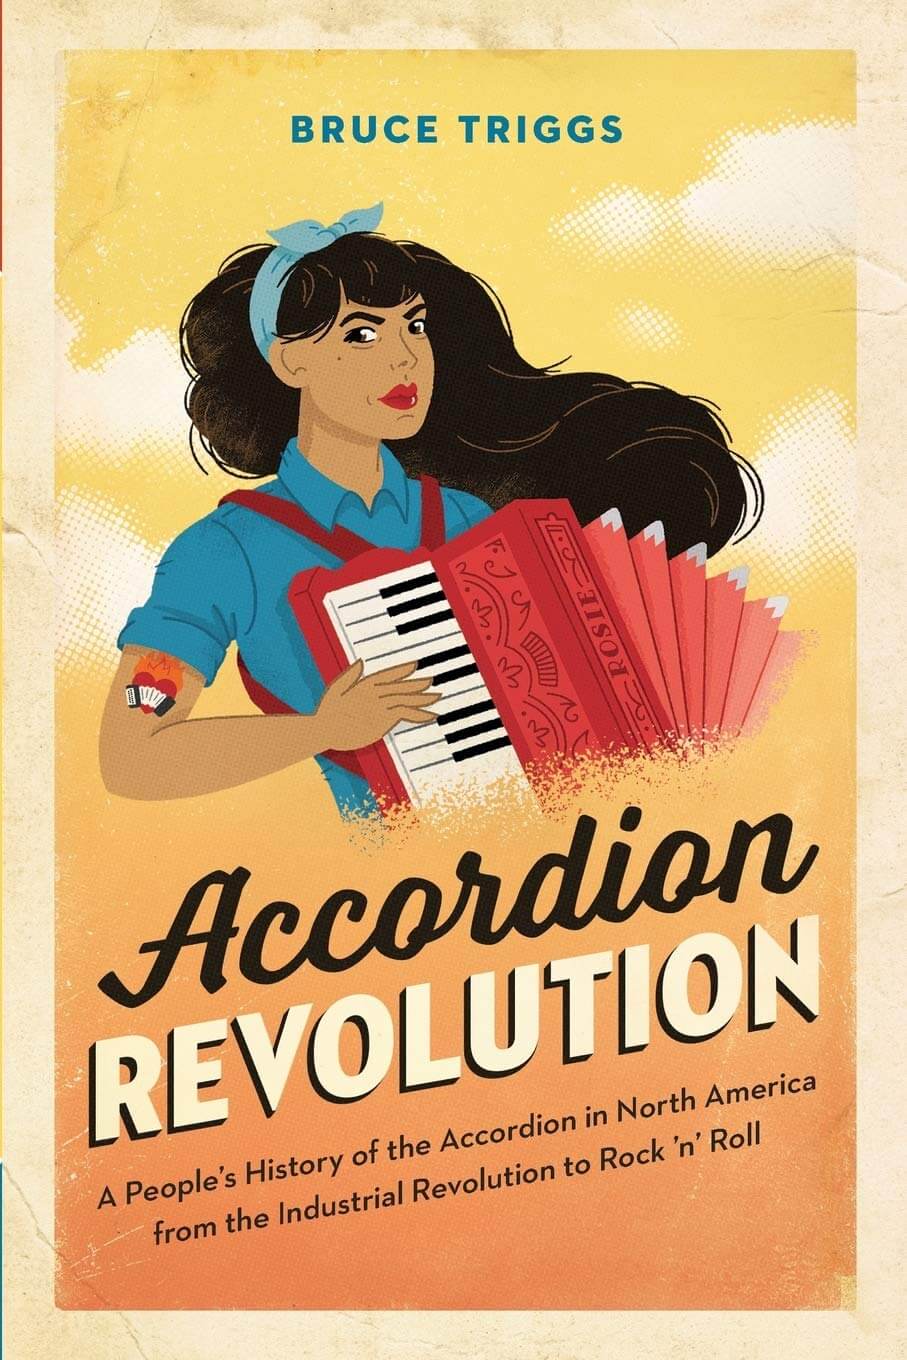 Accordion Revolution: A People’s History of the Accordion in North America from the Industrial Revolution to Rock and Roll